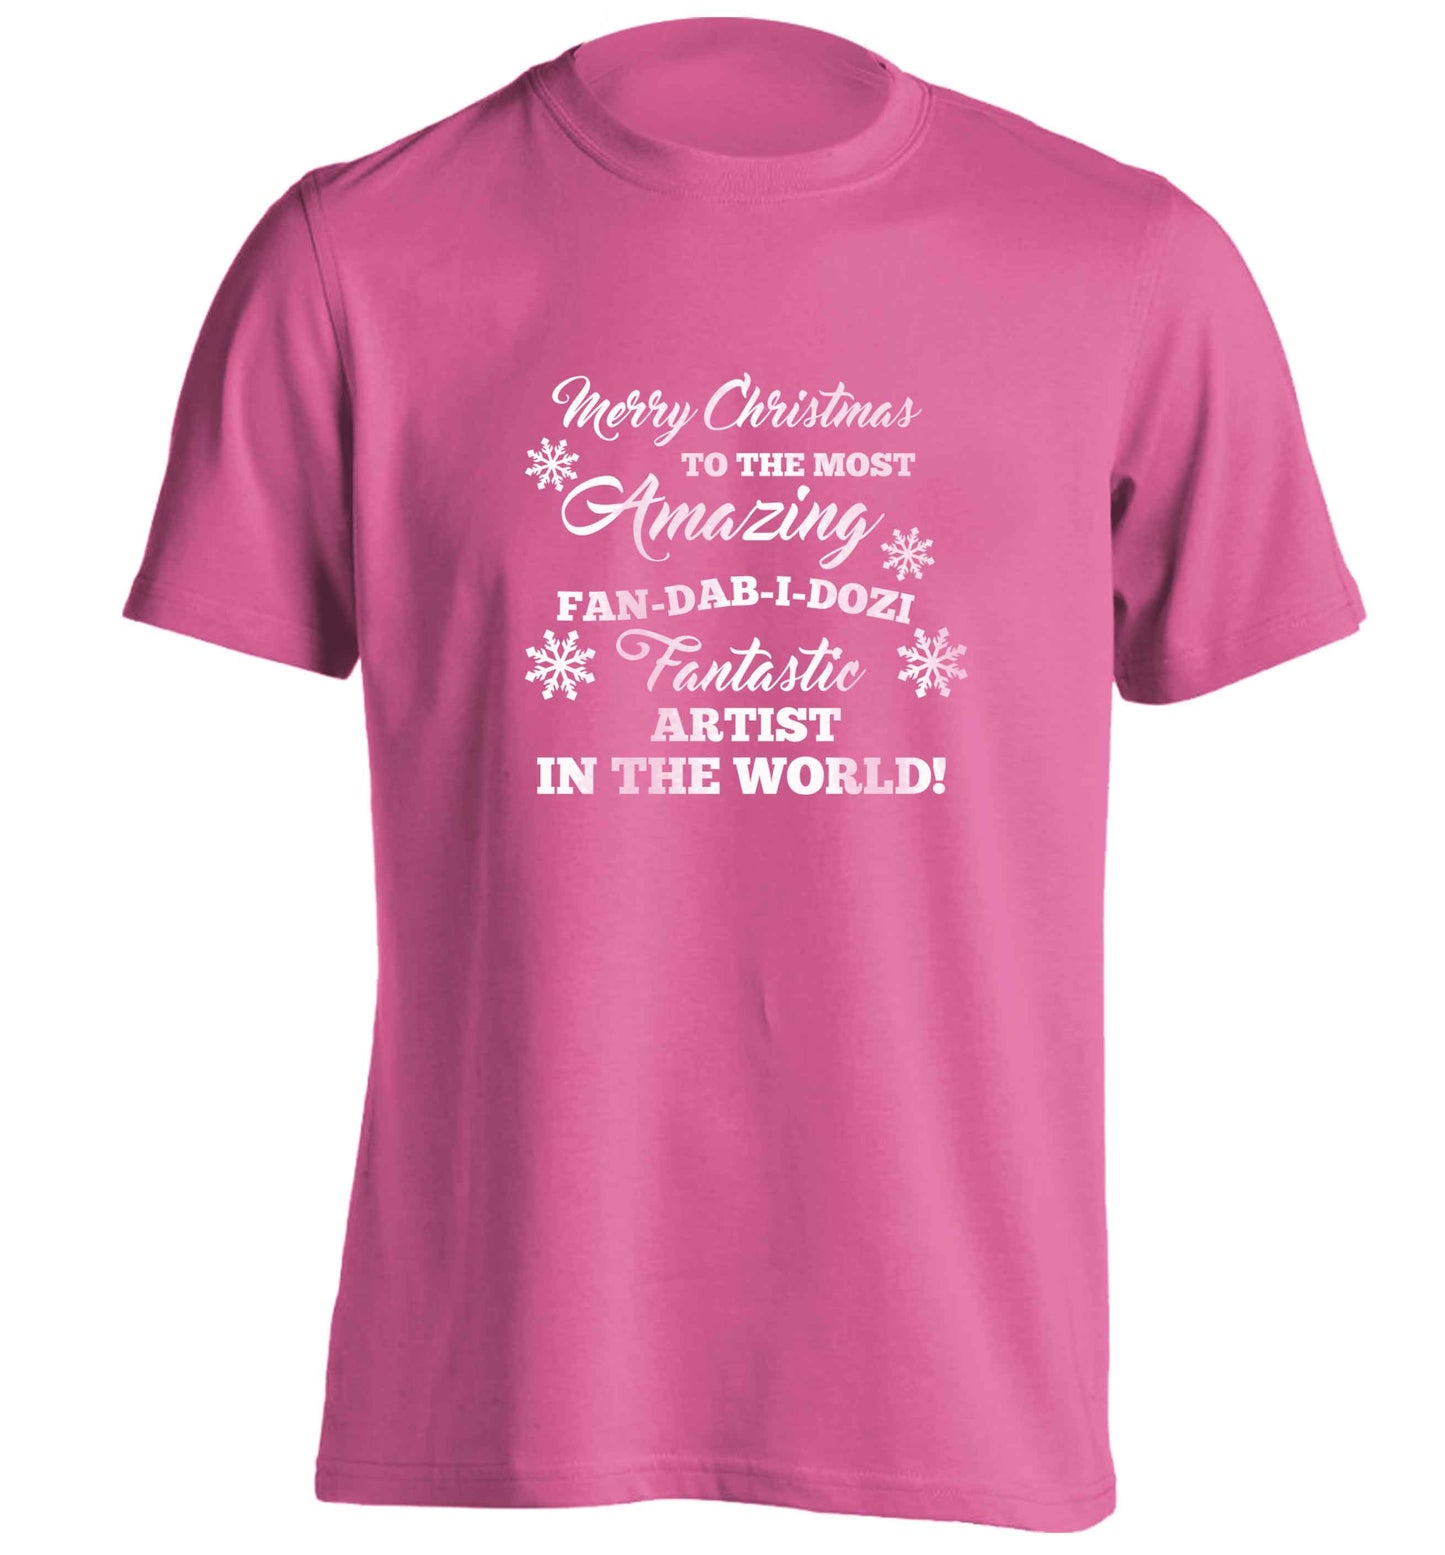 Merry Christmas to the most amazing artist in the world! adults unisex pink Tshirt 2XL